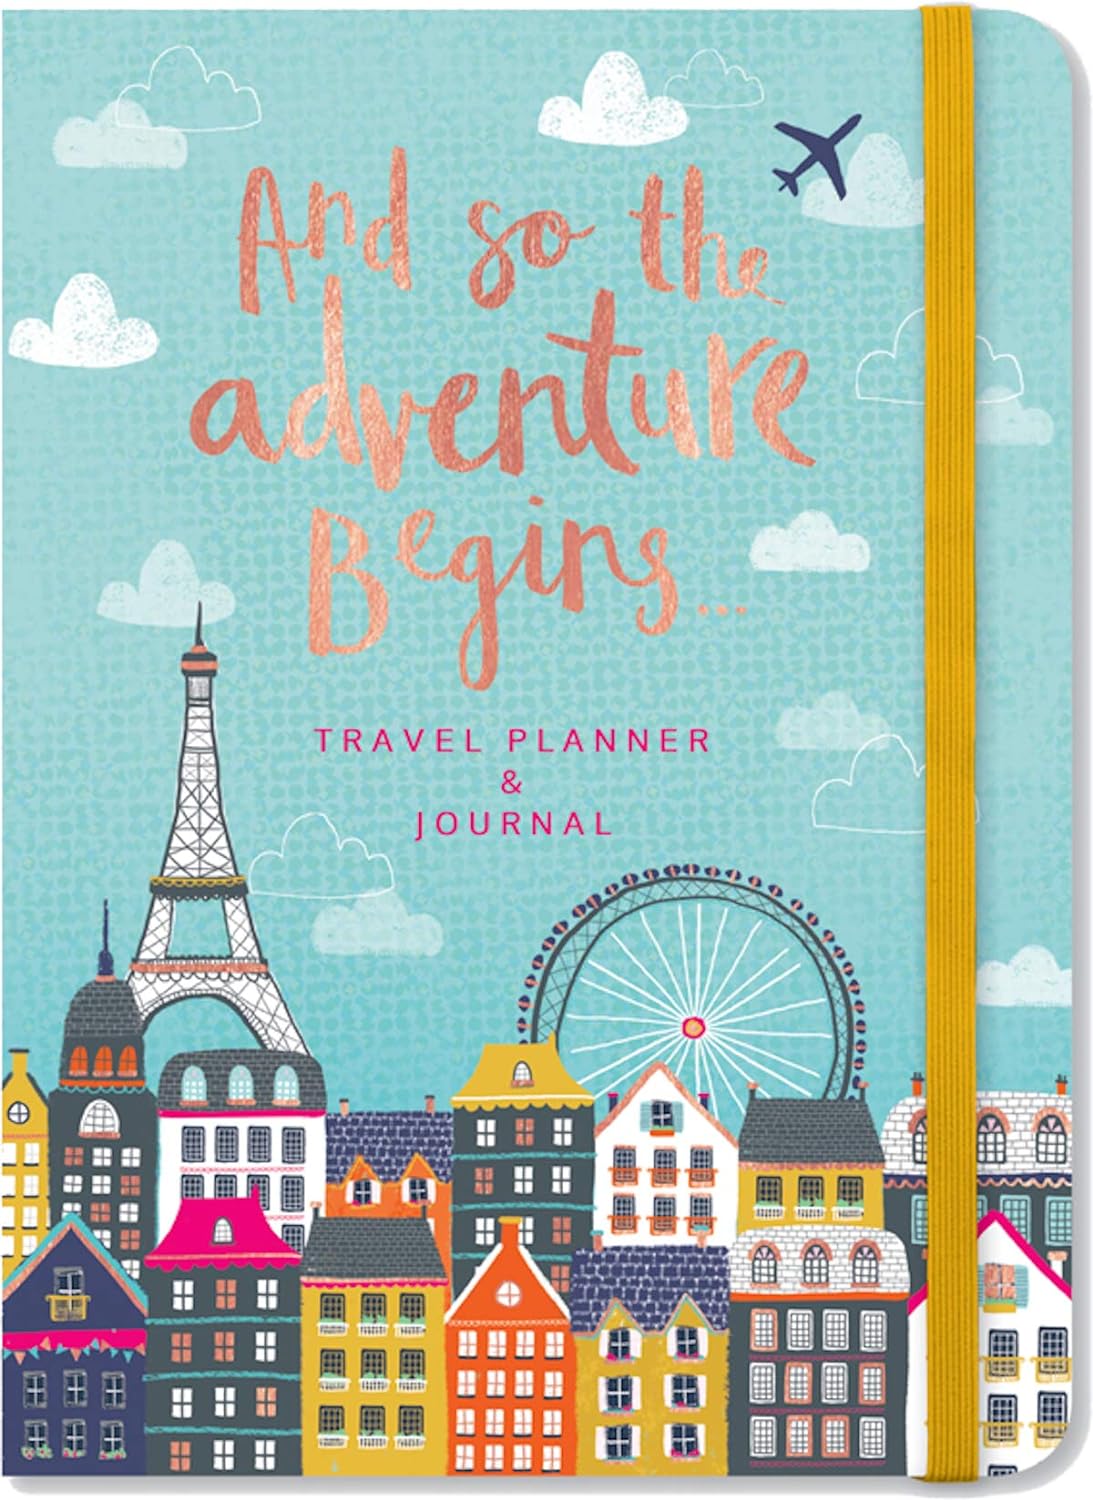 Soft Covered Travel Planner & Journal with 4 Tabbed Sections and So The Adventure Begins.